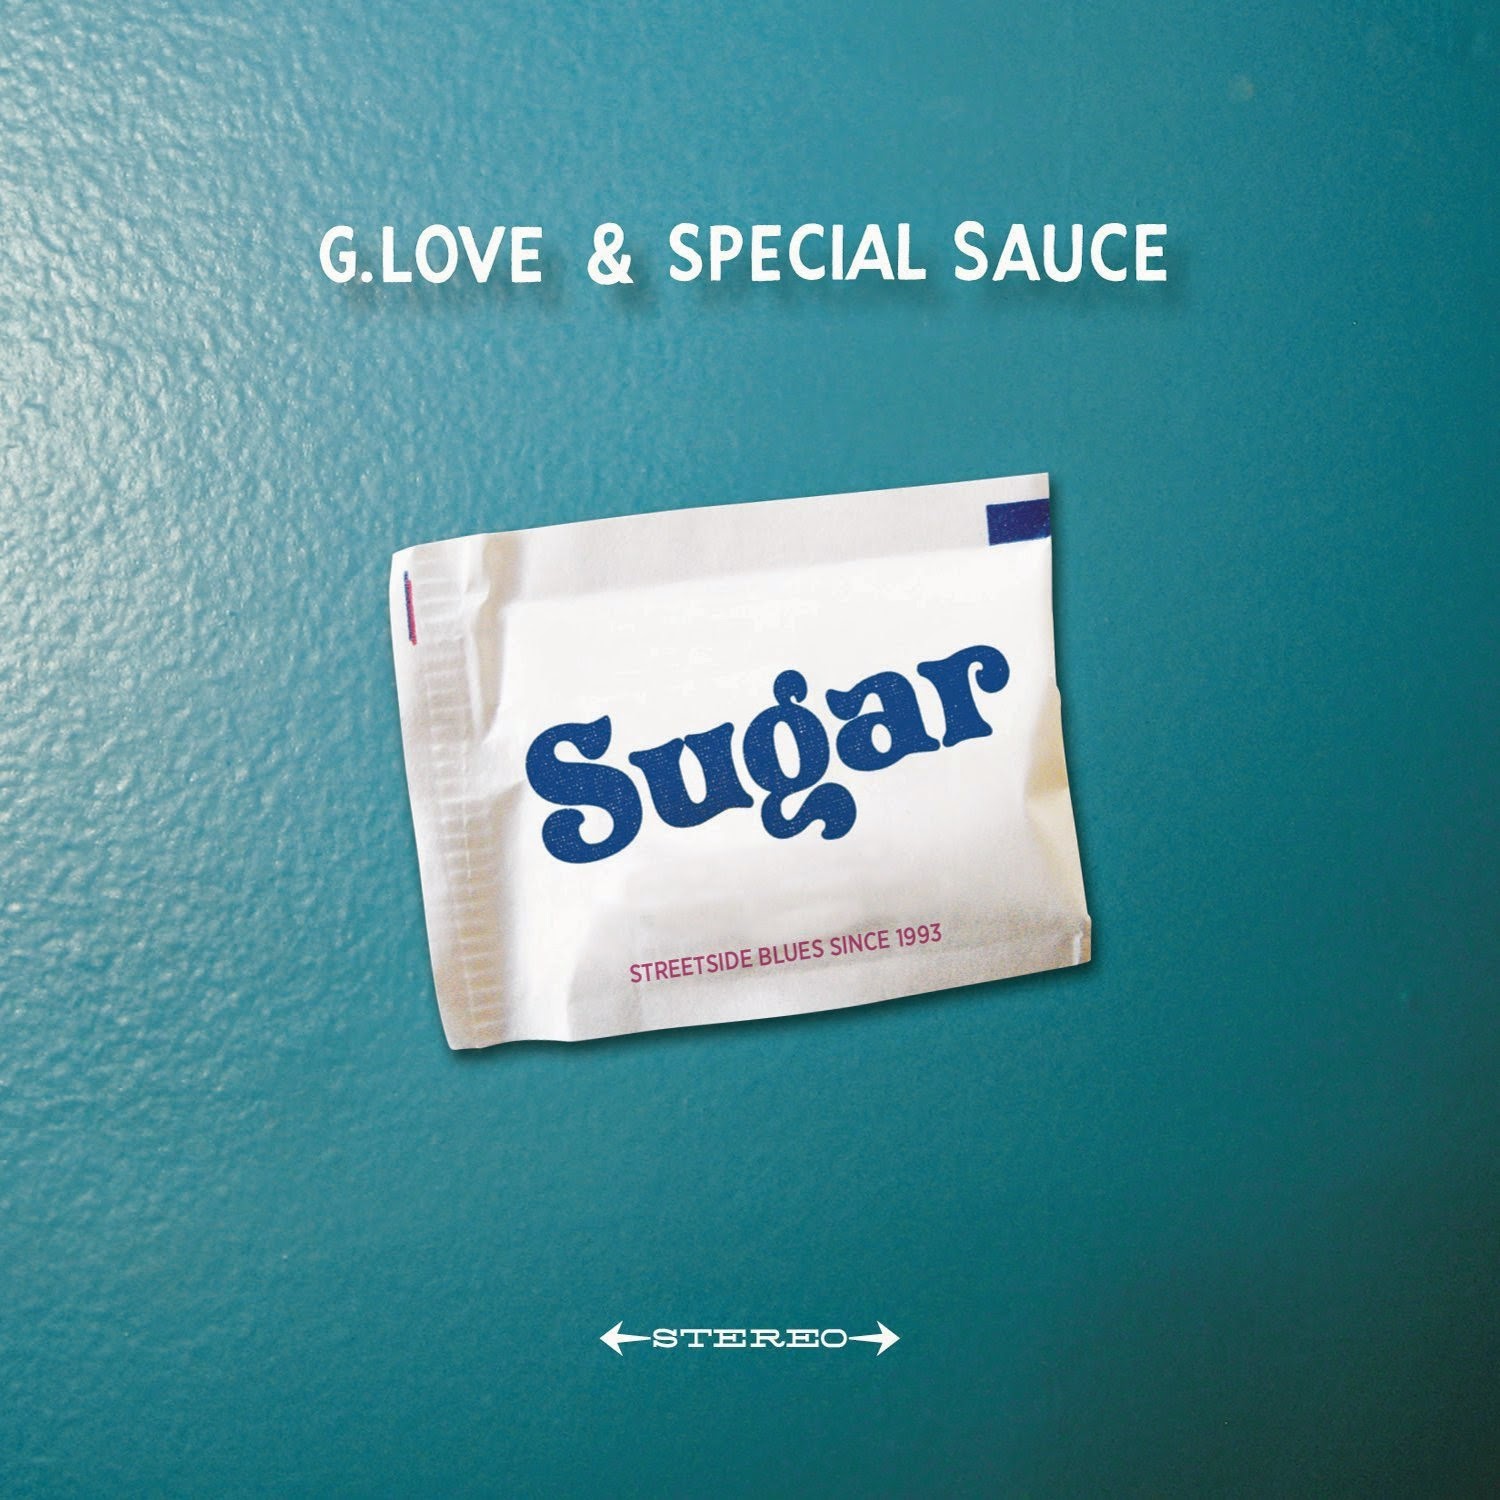 Hot and lovely sugar. Sugar Love. Special Sauce. S+G Love. G.Love певец.